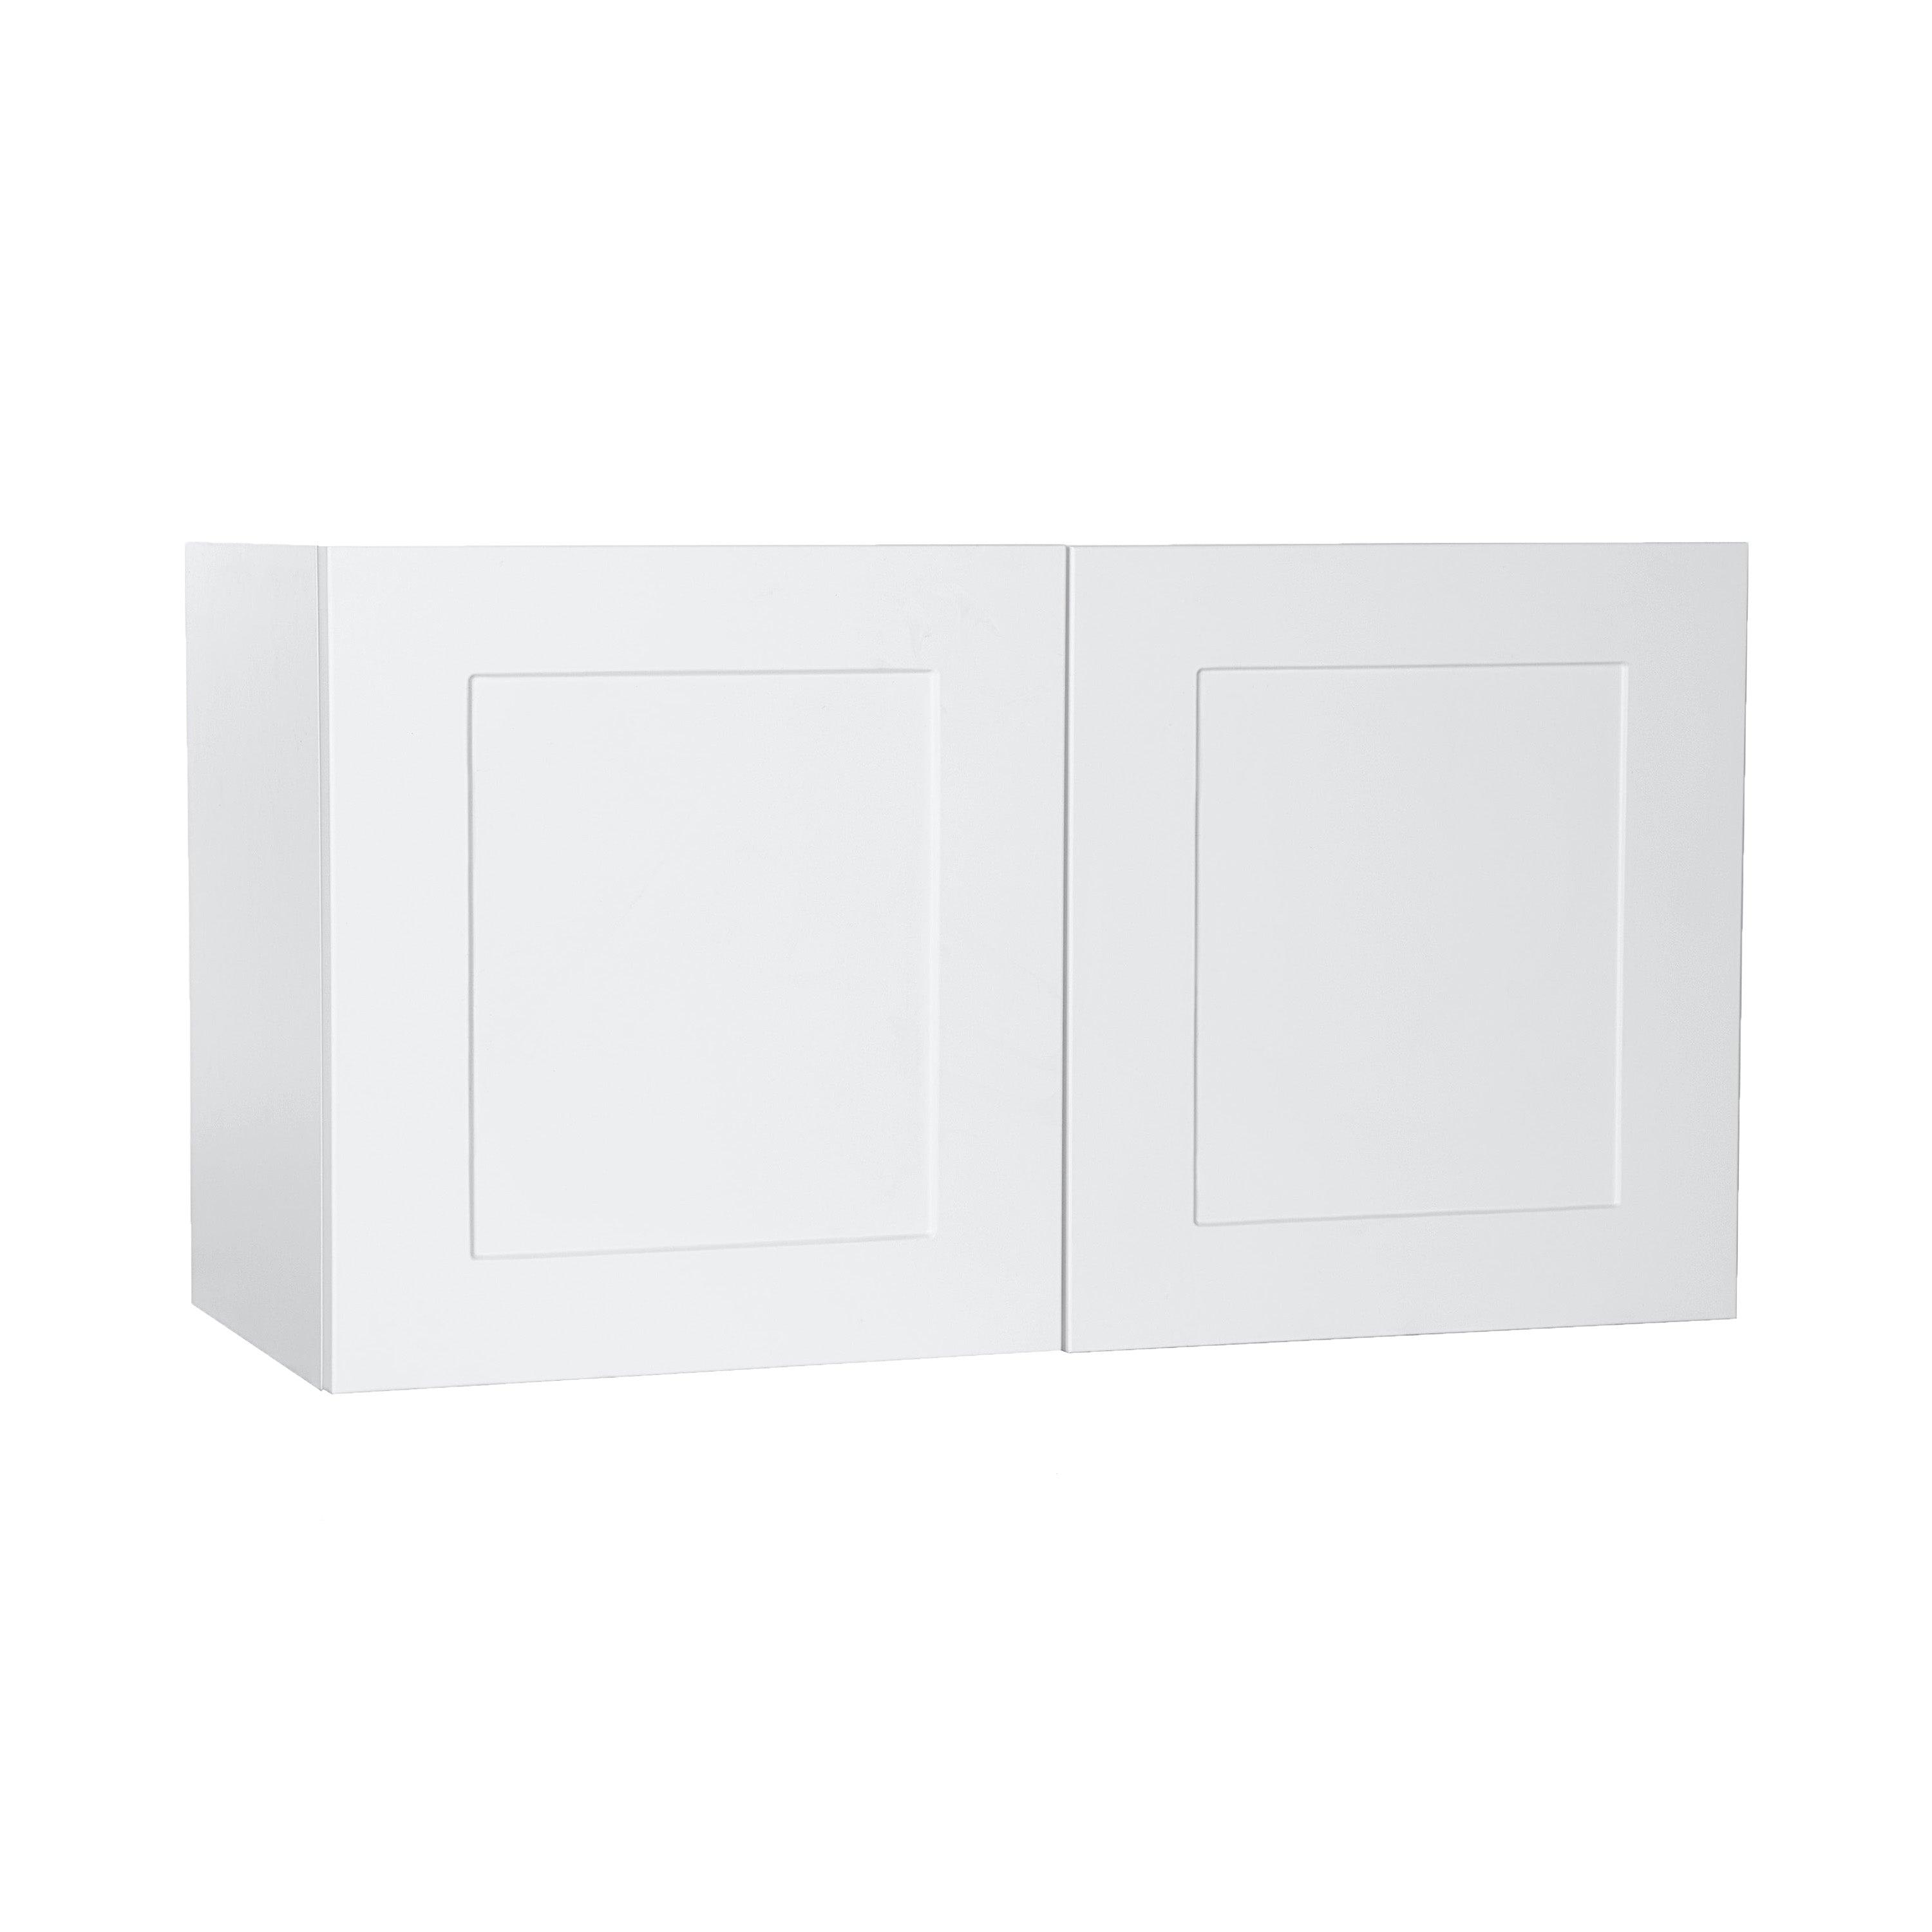 Quick Assemble Modern Style with Soft Close, White Shaker Wall Bridge Kitchen Cabinet (30 in W x 12 in H x 12 in D) -  Pro-Edge HD